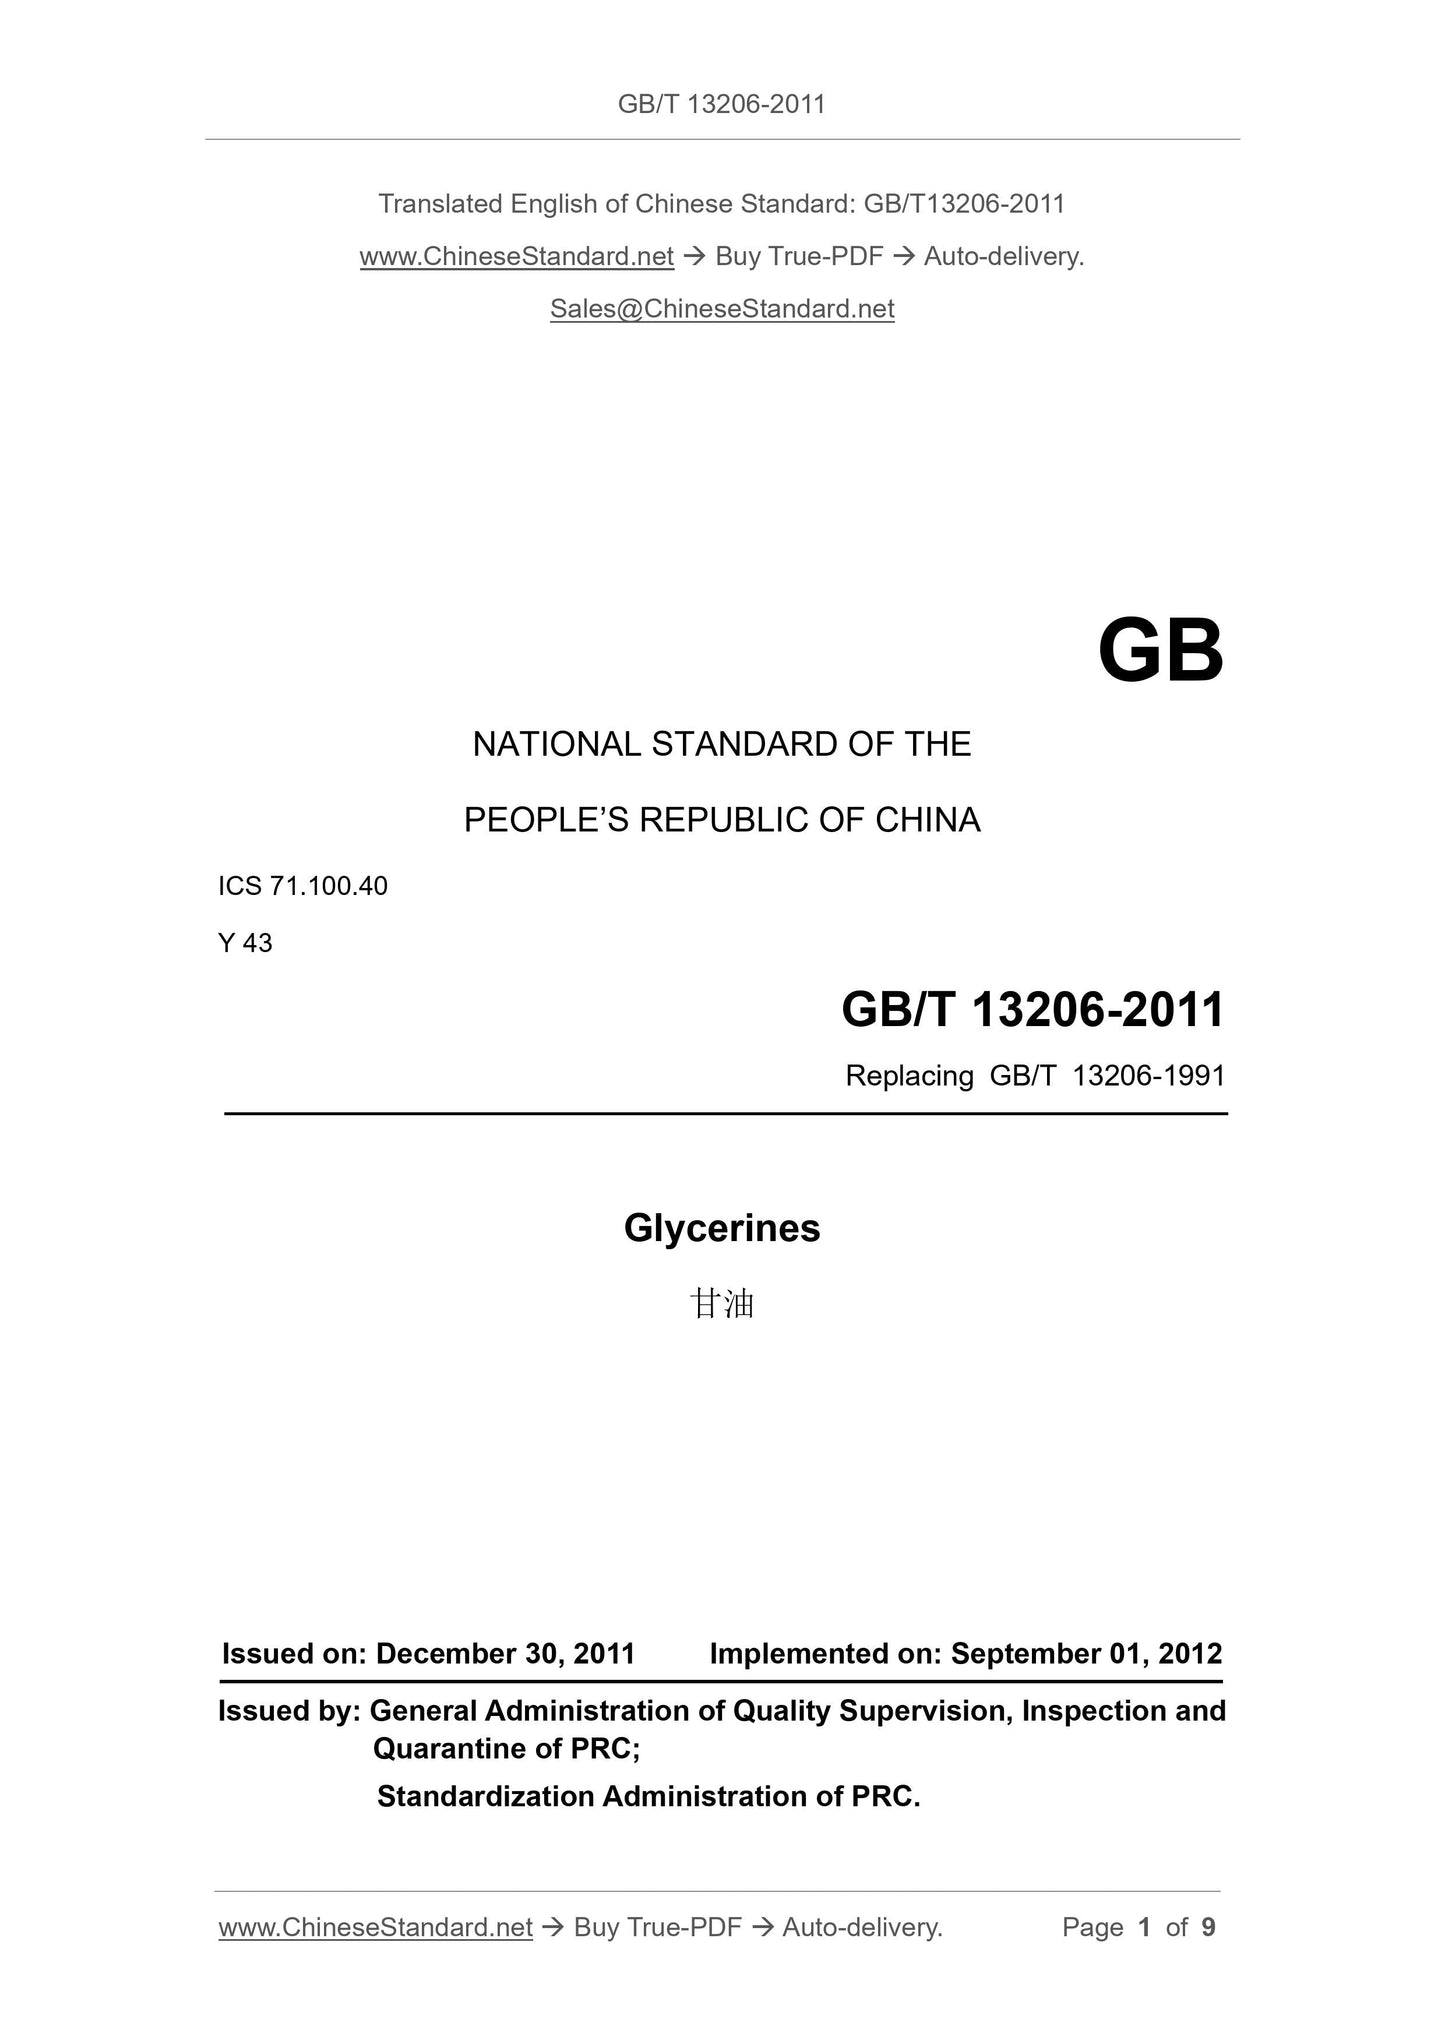 GB/T 13206-2011 Page 1